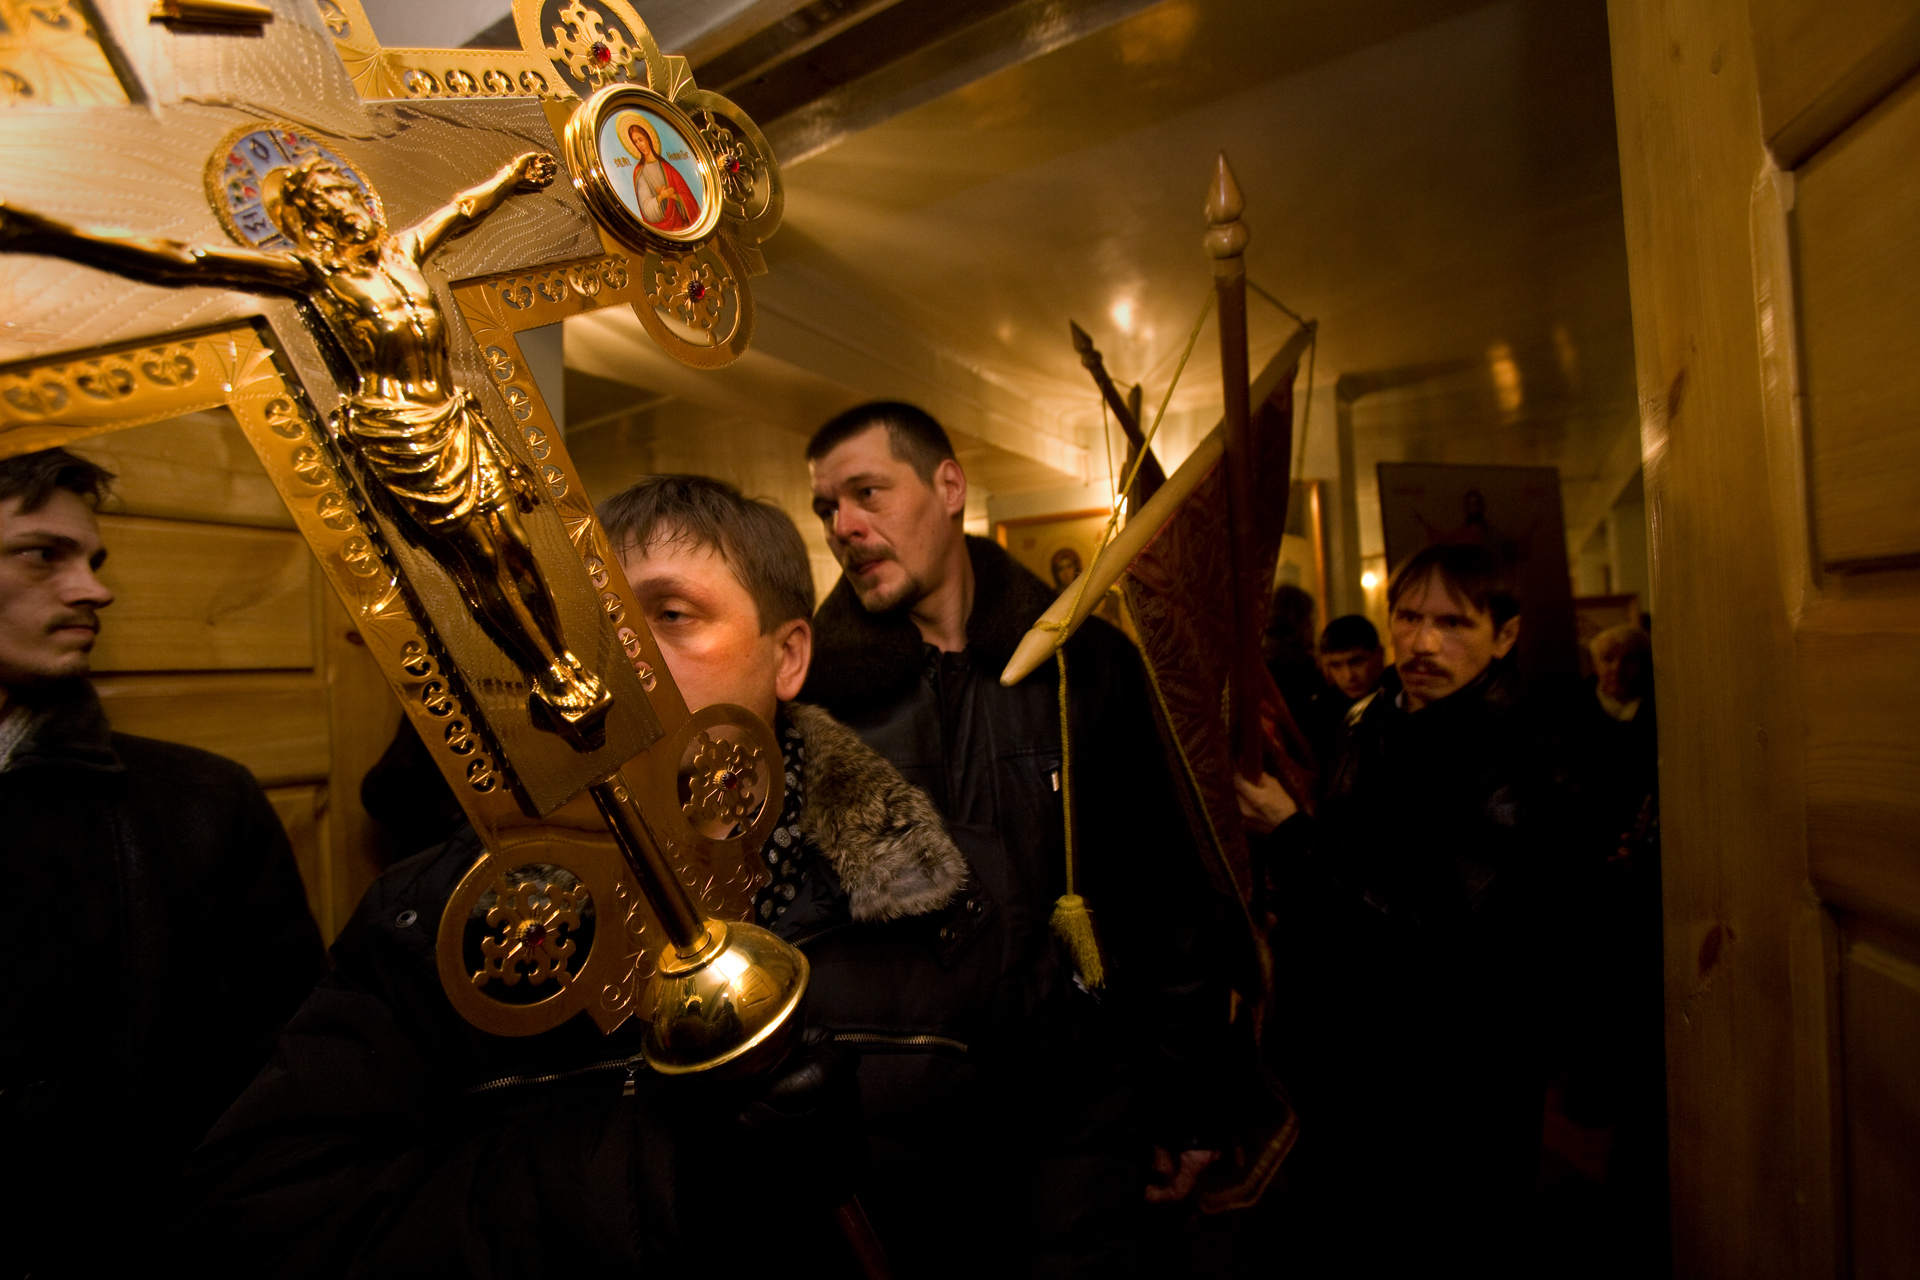  The weight of ritual intensifies on Easter Sunday as parishioners collect banners and icons for a procession before midnight Mass.  Vorkuta, Russia  